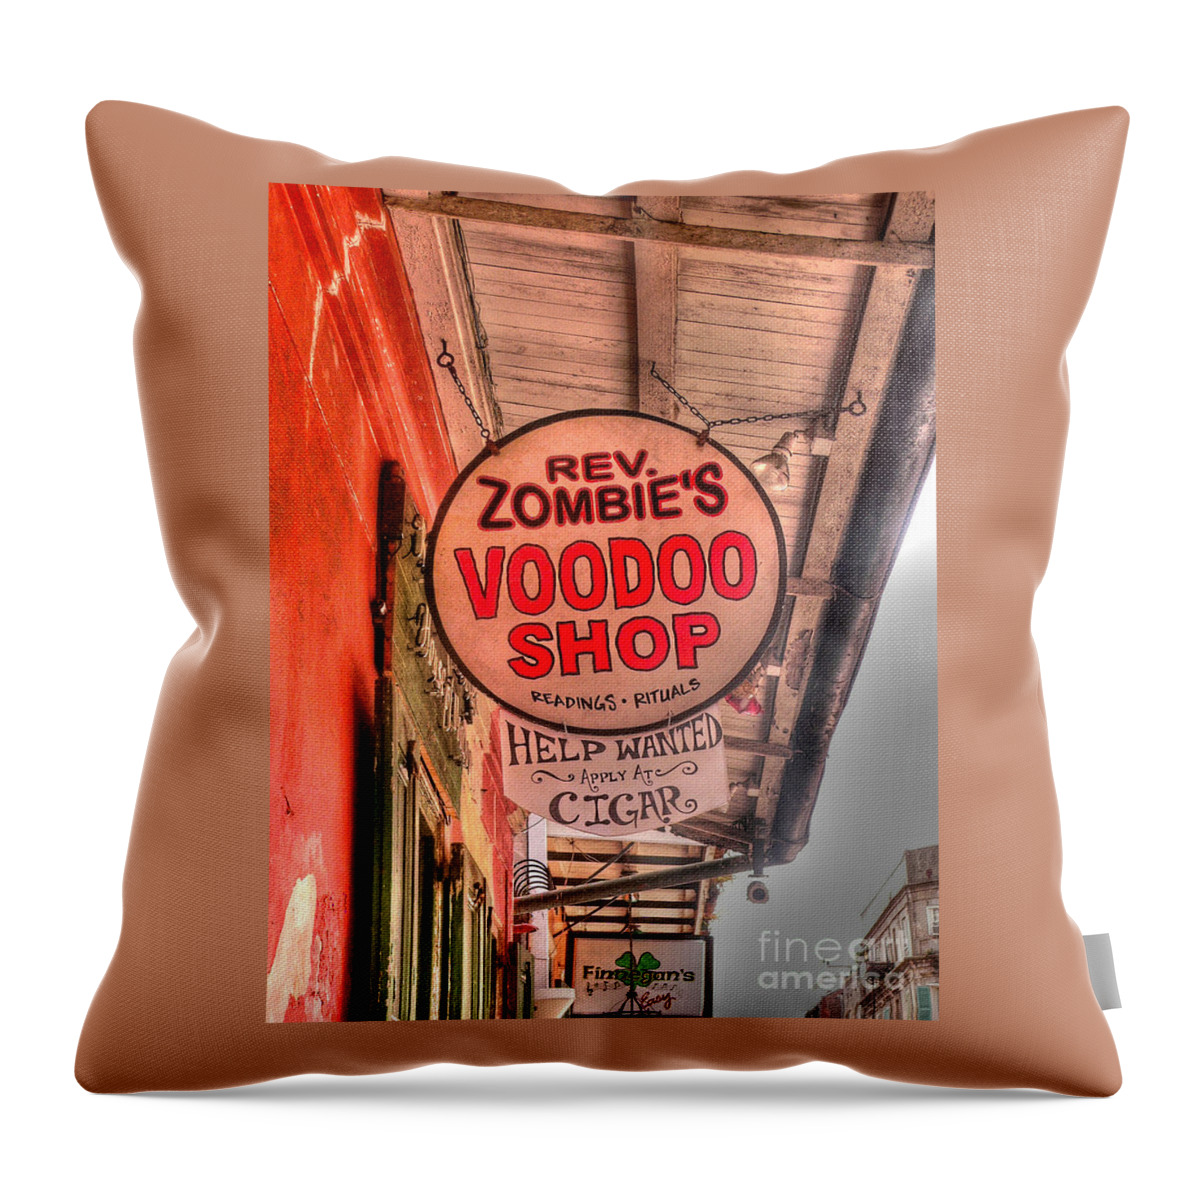 Voodoo Shop Throw Pillow featuring the photograph Rev. Zombie's by David Bearden